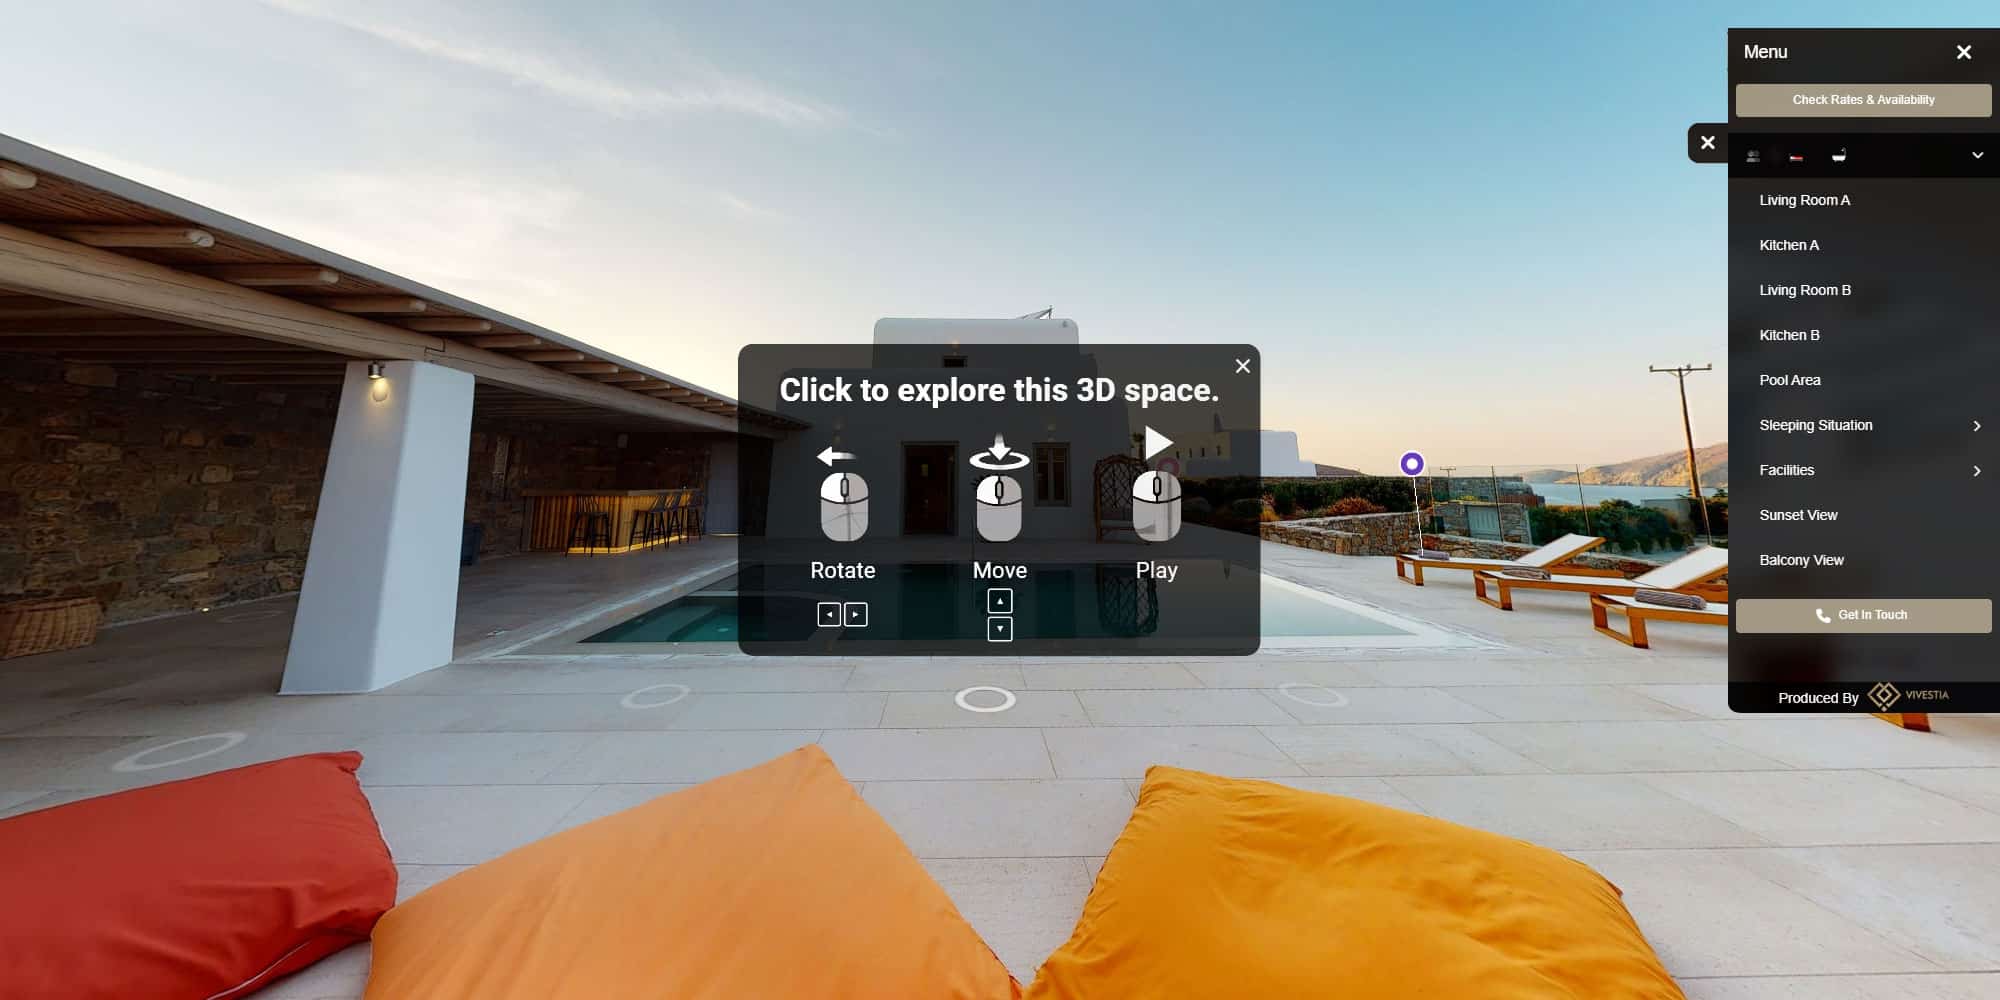 360 Virtual Tours Unleashed: Your Passport to Global Exploration-Vivestia | Risk-Free Villas, Hotels and Cruises in VR